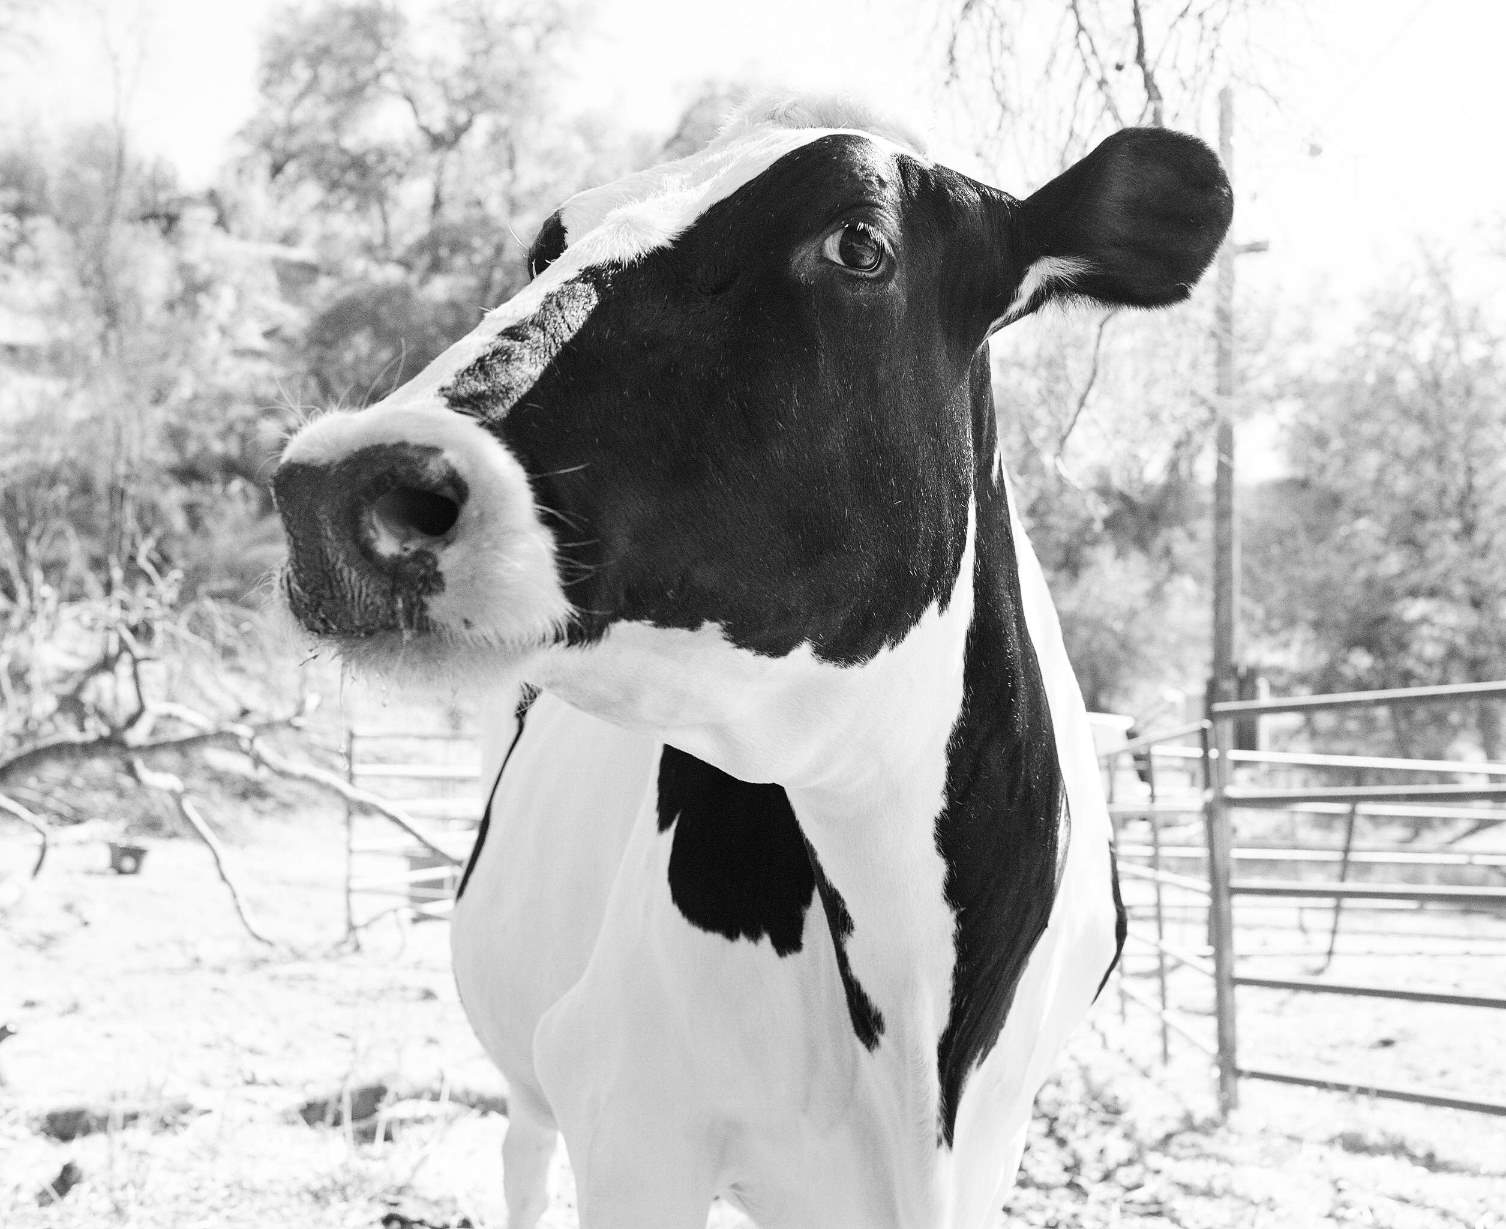 Molly - one of the real cows behind the 'Eat Mor Chikin' campaign 